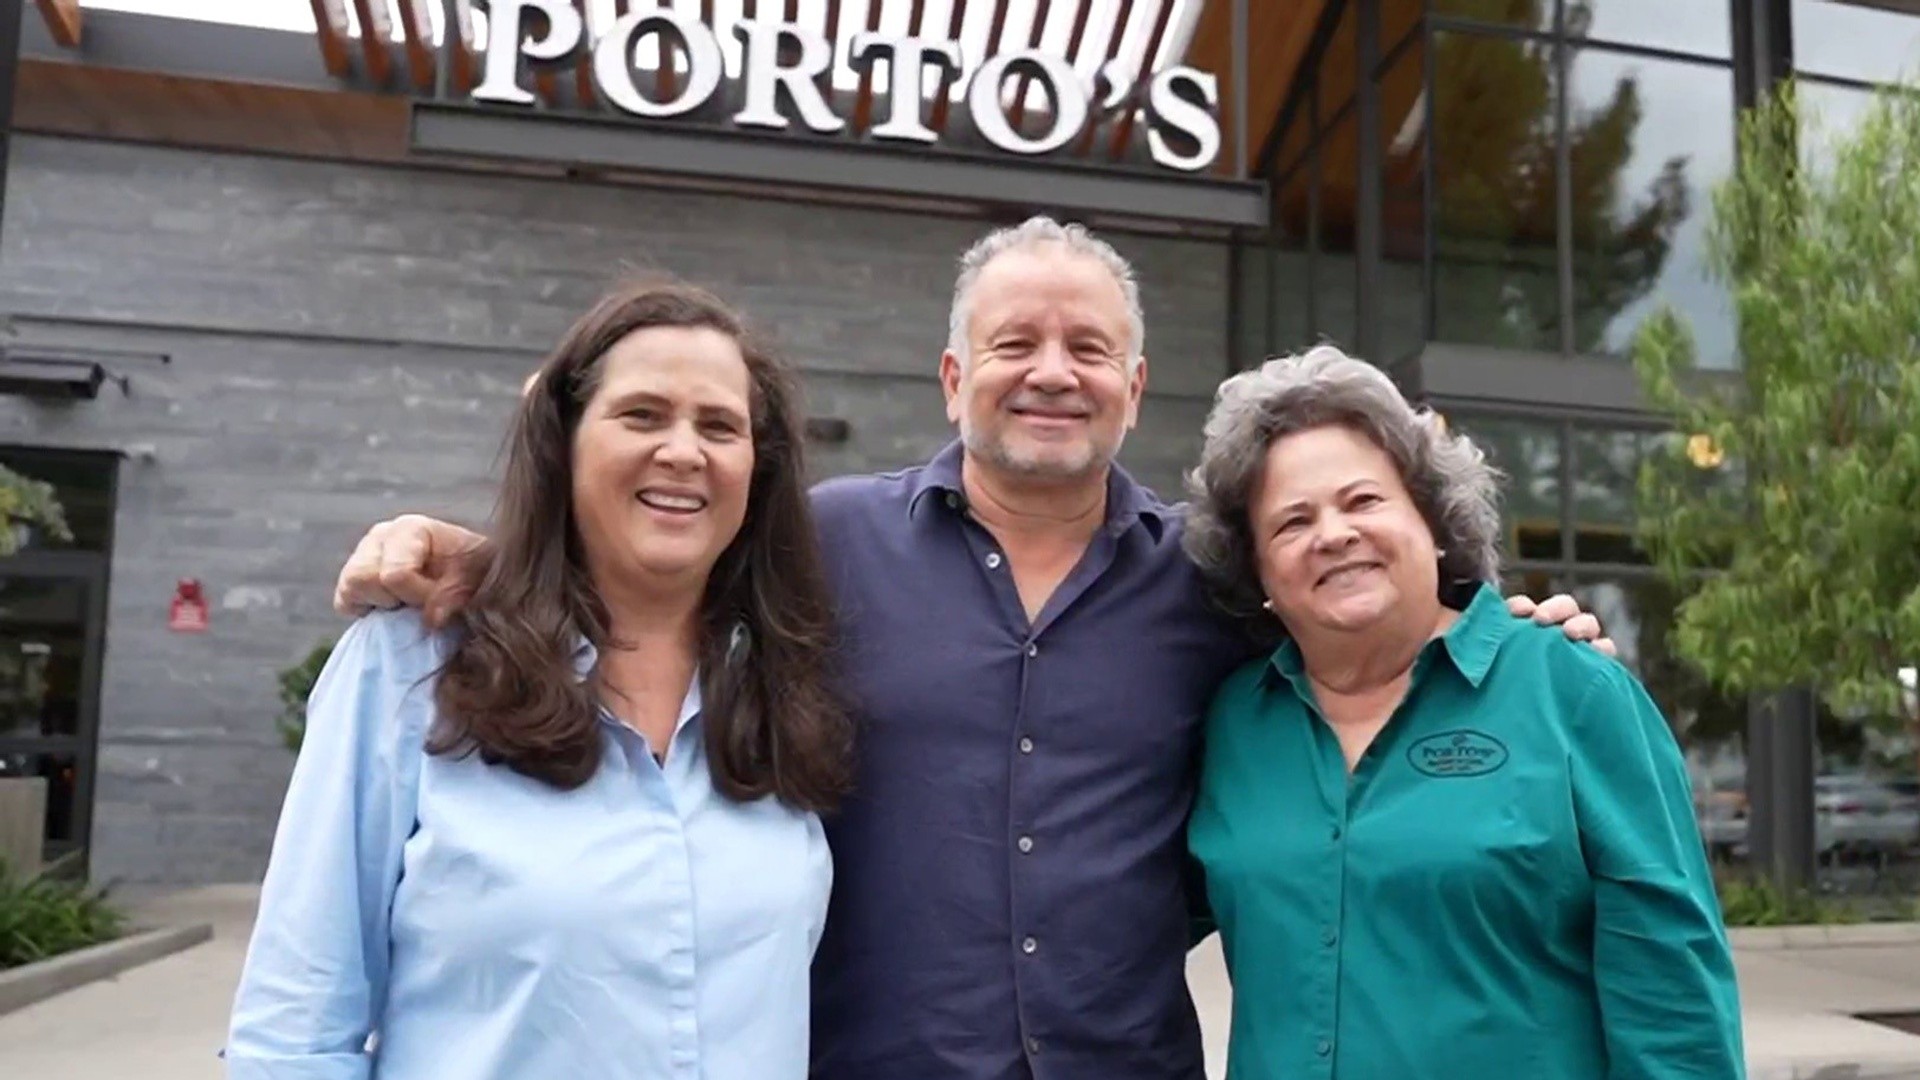 Meet the family behind the beloved Porto's Bakery in LA